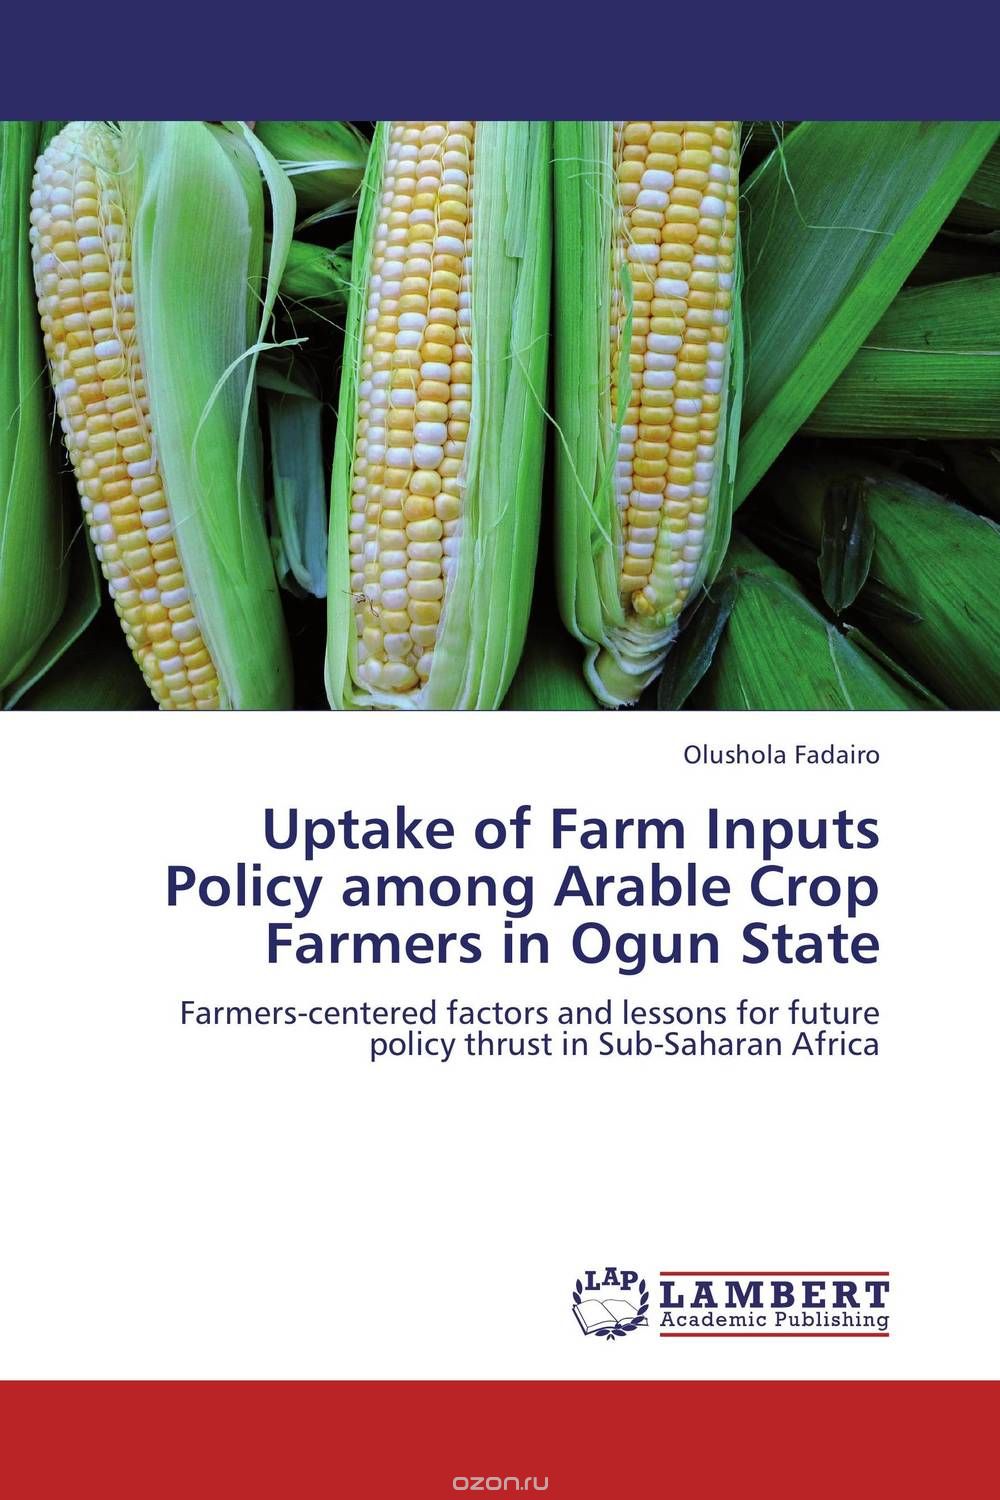 Uptake of Farm Inputs Policy among Arable Crop Farmers in Ogun State